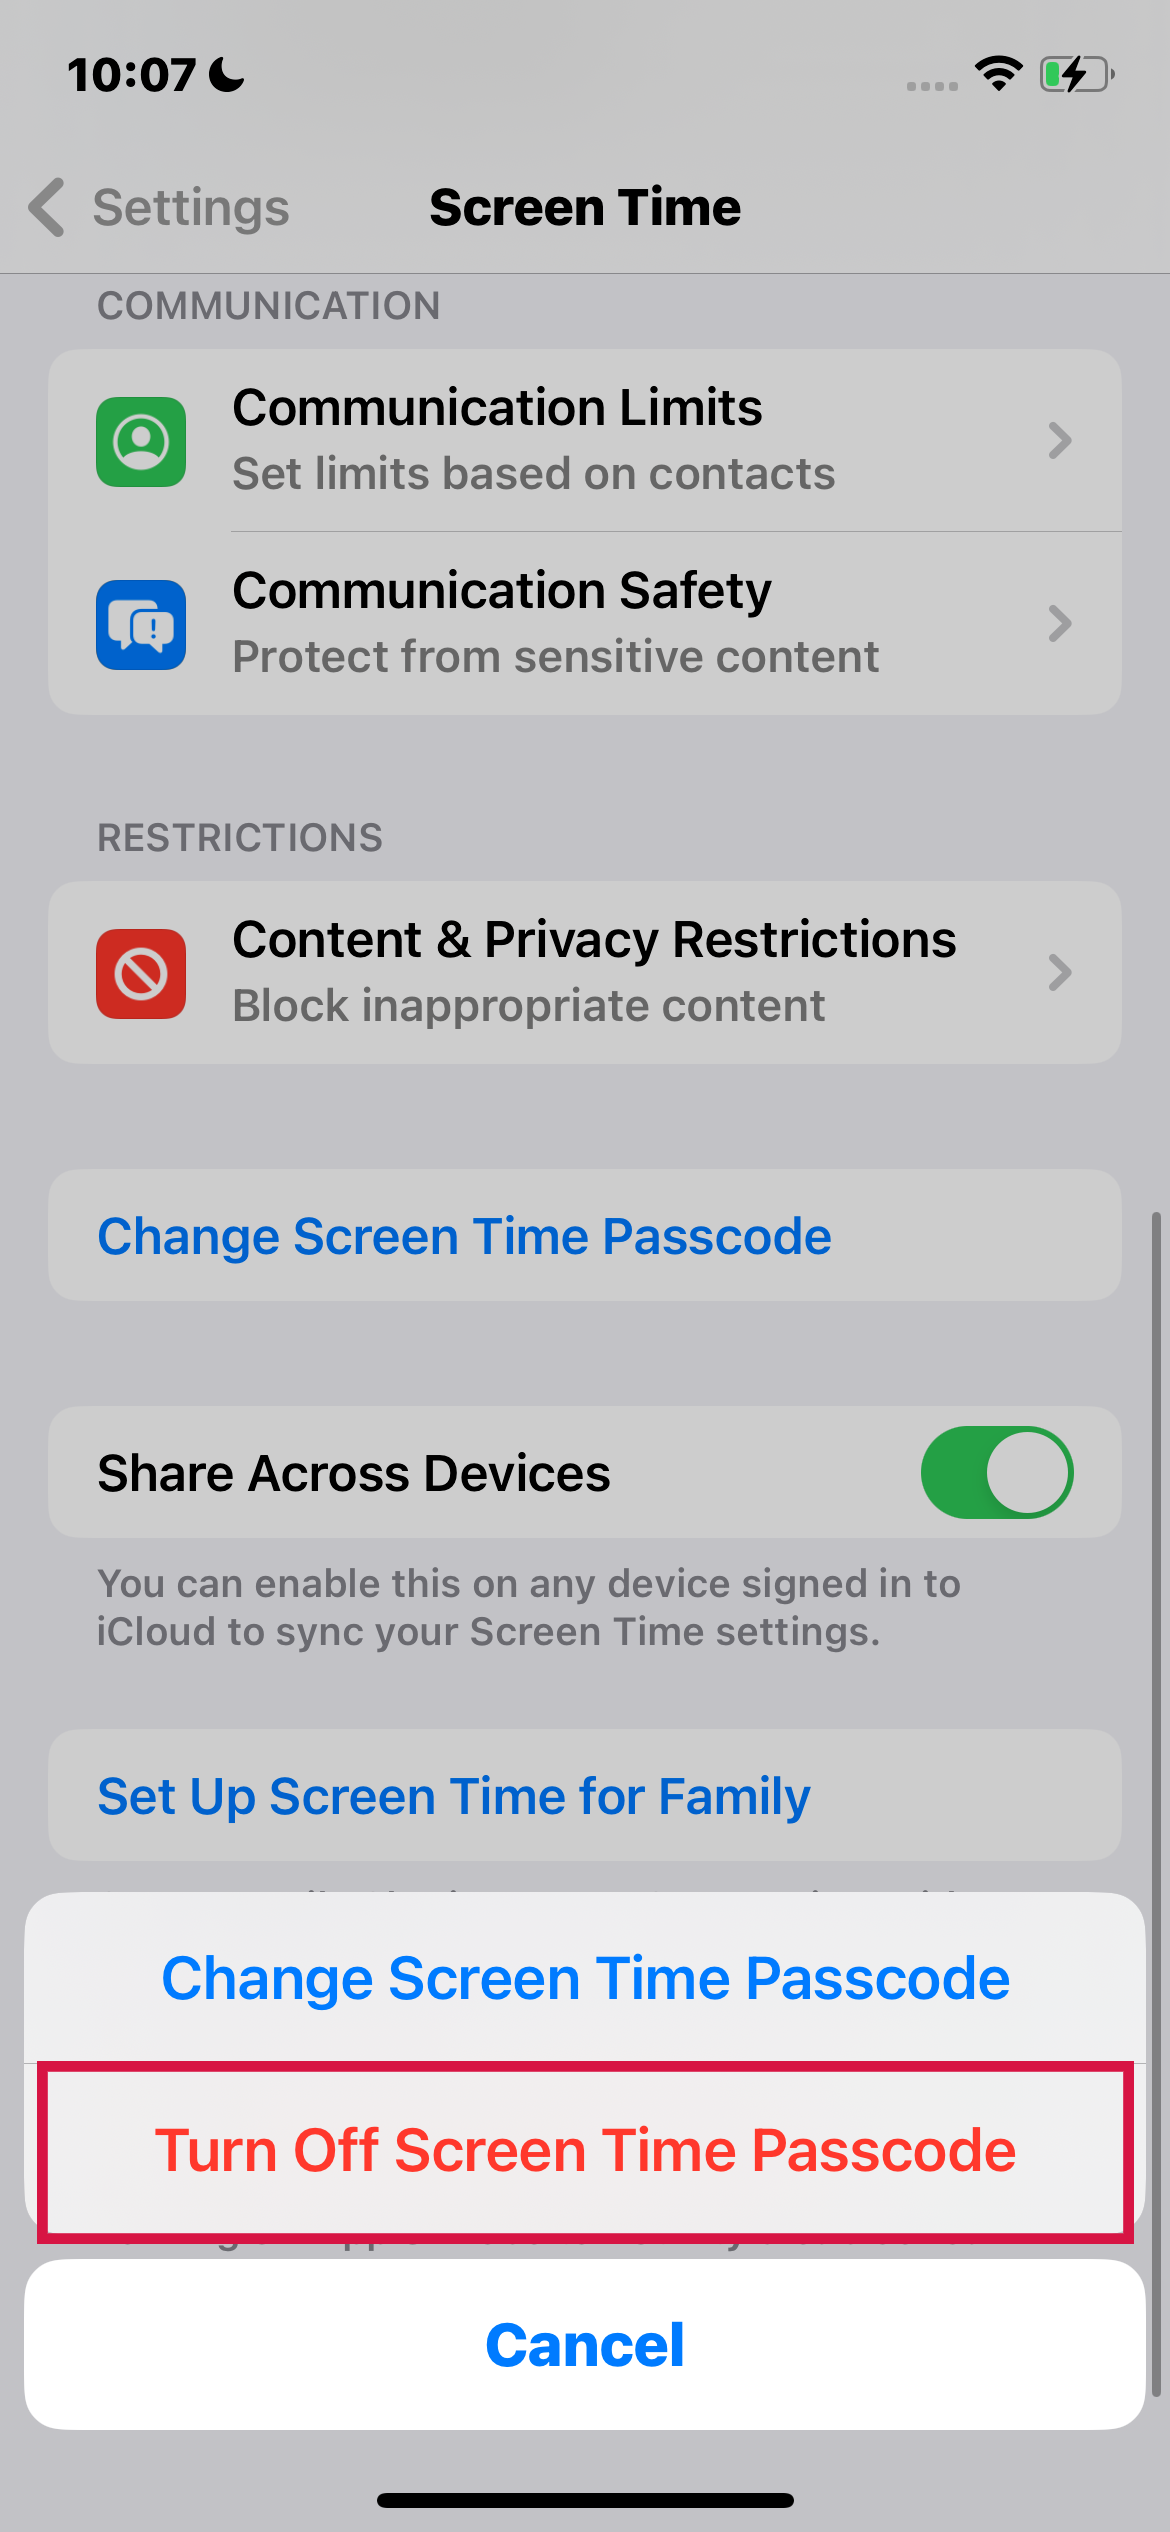 Turn Off Screen Time Passcode on iPhone